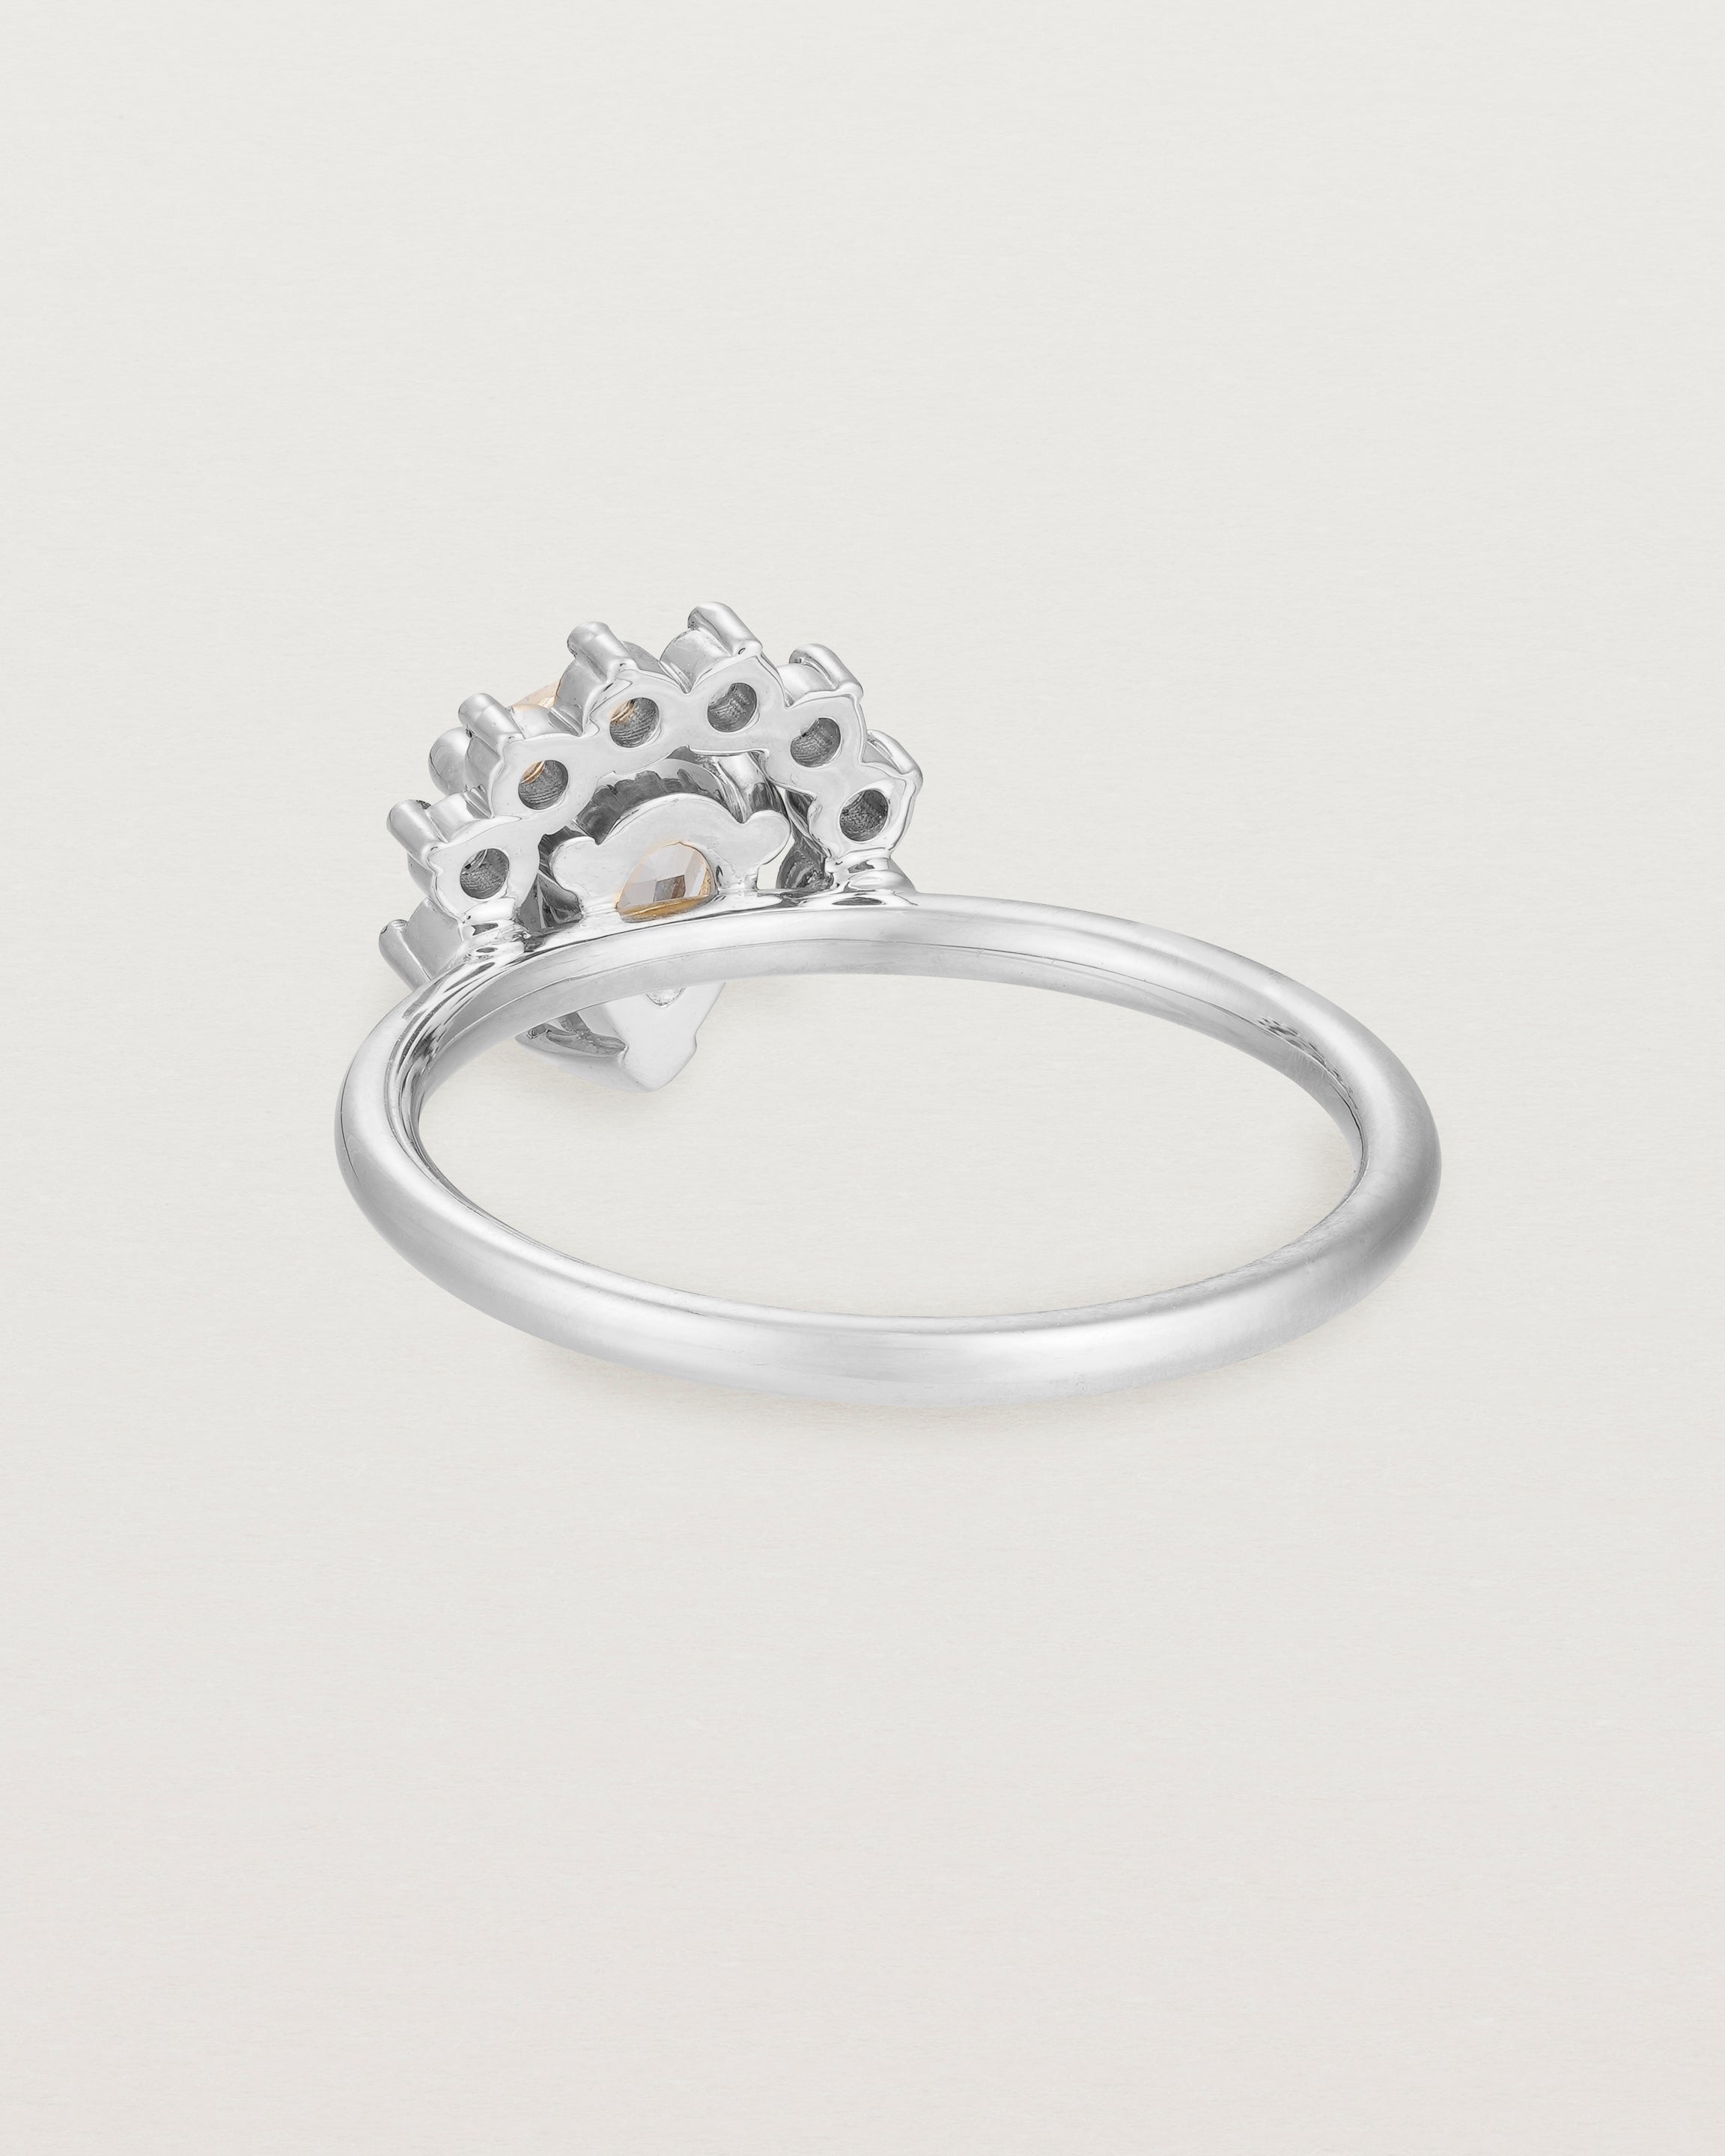 Back view of the Rose Ring | Morganite & Diamonds | White Gold.